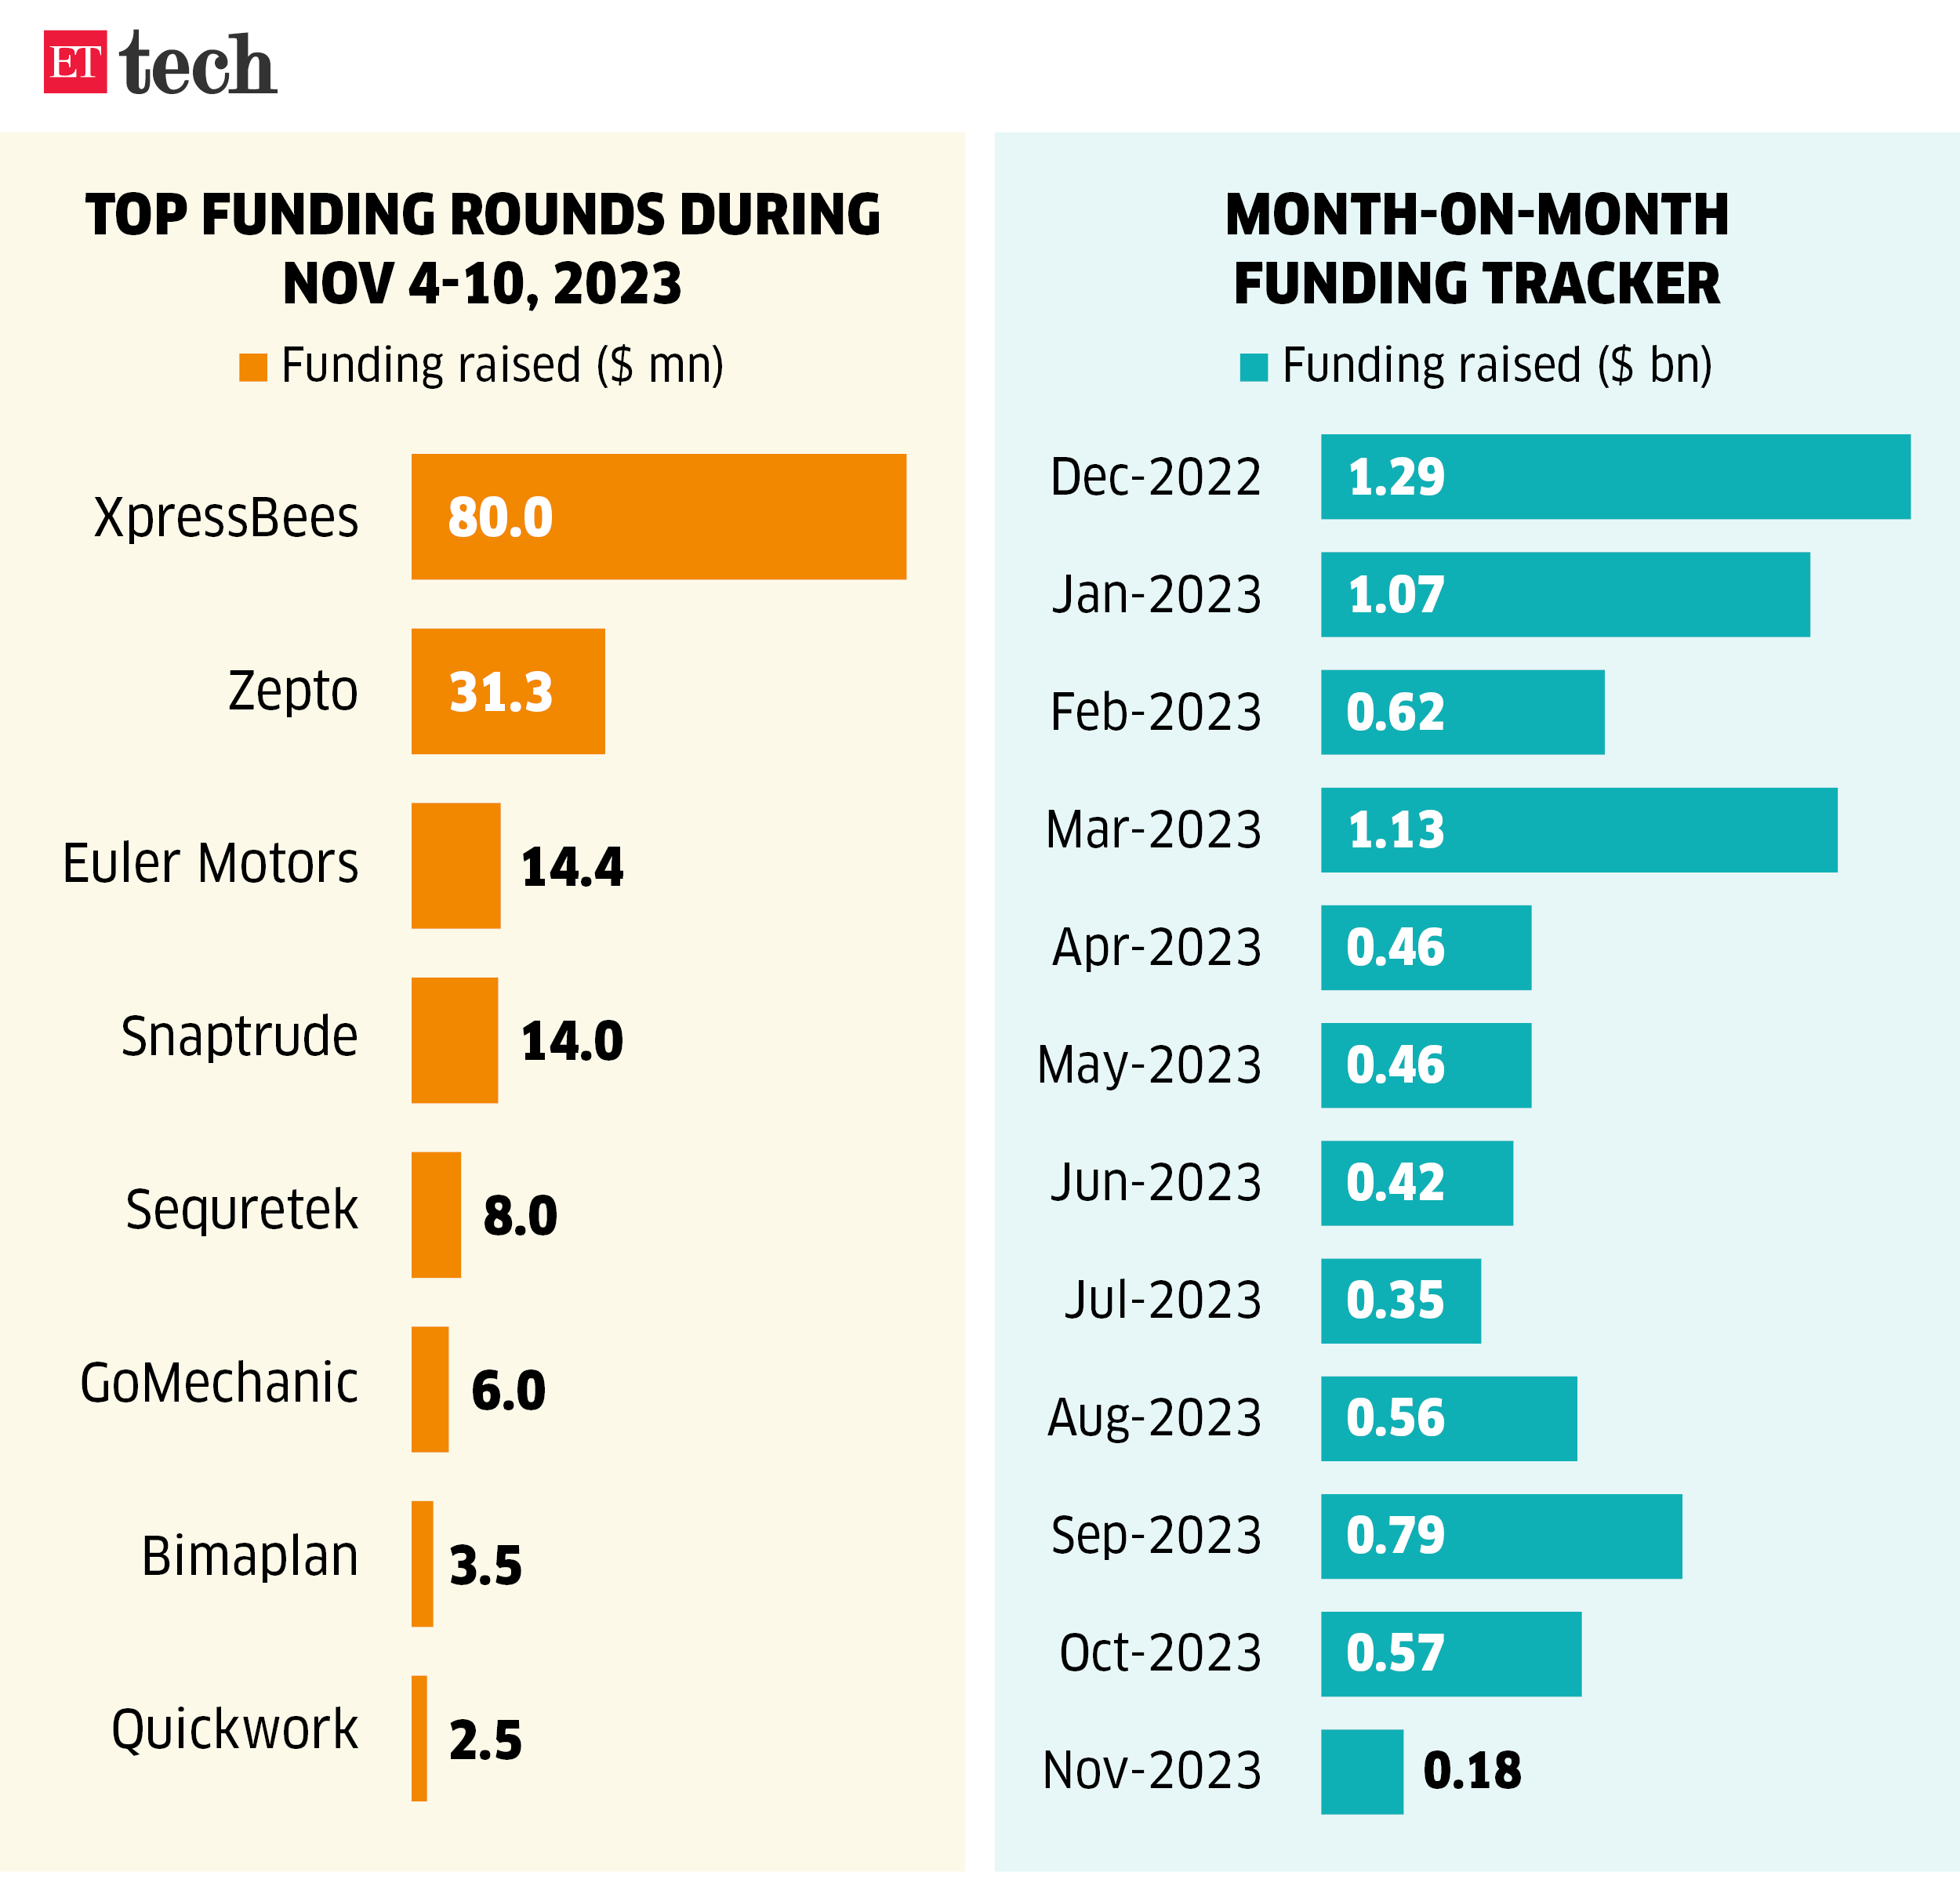 Top funding rounds during_Nov 4-10, 2023_ETTECH